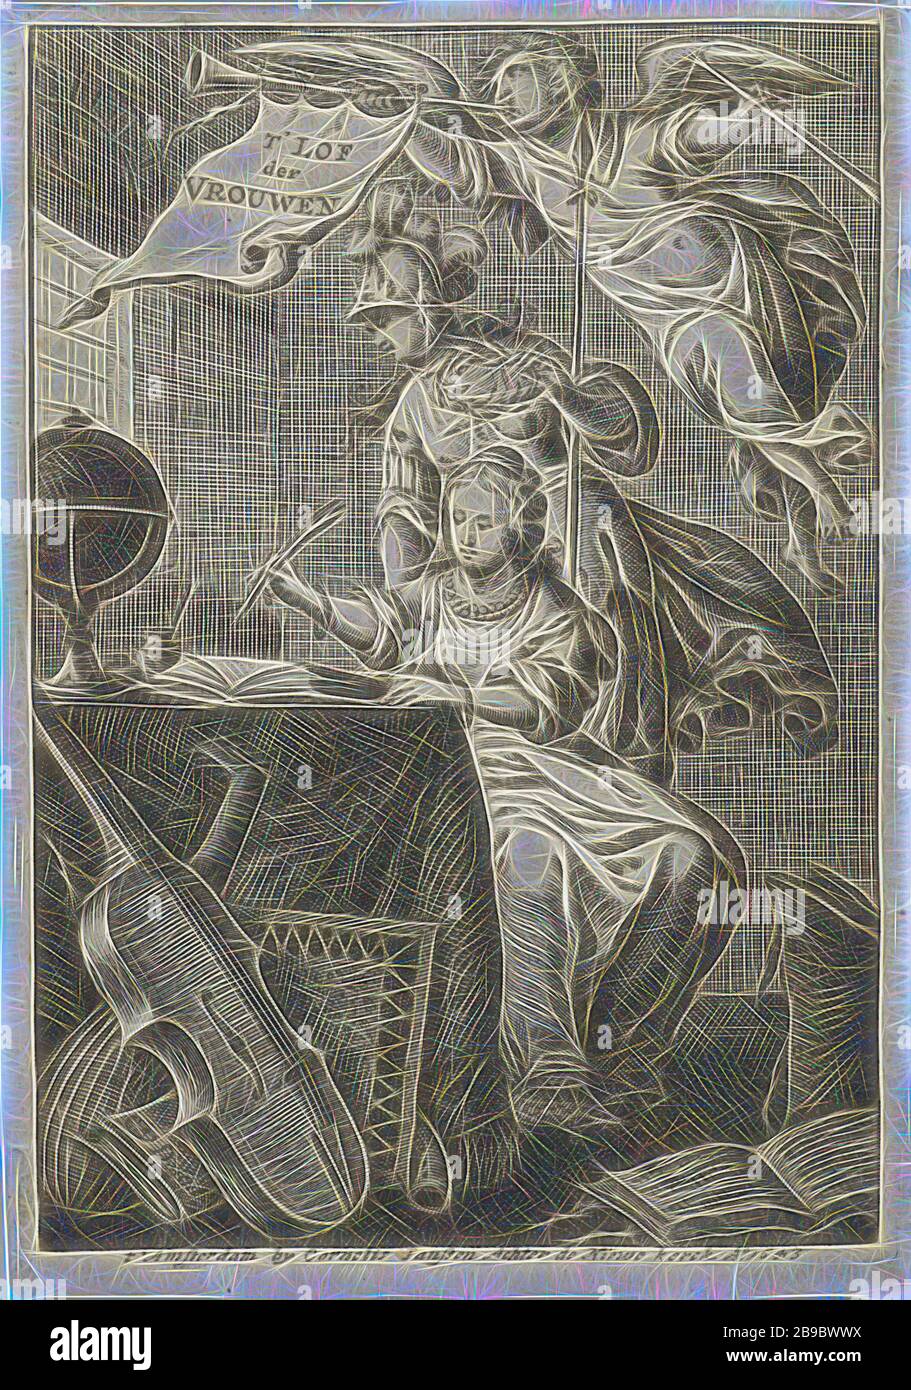 Woman writes at the table in the presence of Minerva and Faam with praise trumpet Title page for: T 'Lof der vrouw, Amsterdam 1643 T' Lof van Vrouwen (title on object) globe state. Minerva looks over her shoulder and holds laurel wreath. The seated lady's foot rests on a turtle, possibly she can be identified as Venus Urania as a symbol of domesticity. Fame blows on praise trumpet with banner on which the title is written. On the floor are musical instruments and an embroidery frame, (story of) Minerva (Pallas, Athena), Fame, 'Fama', 'Fama buona', 'Fama chiara' (Ripa), Cornelis van Dalen (I) ( Stock Photo